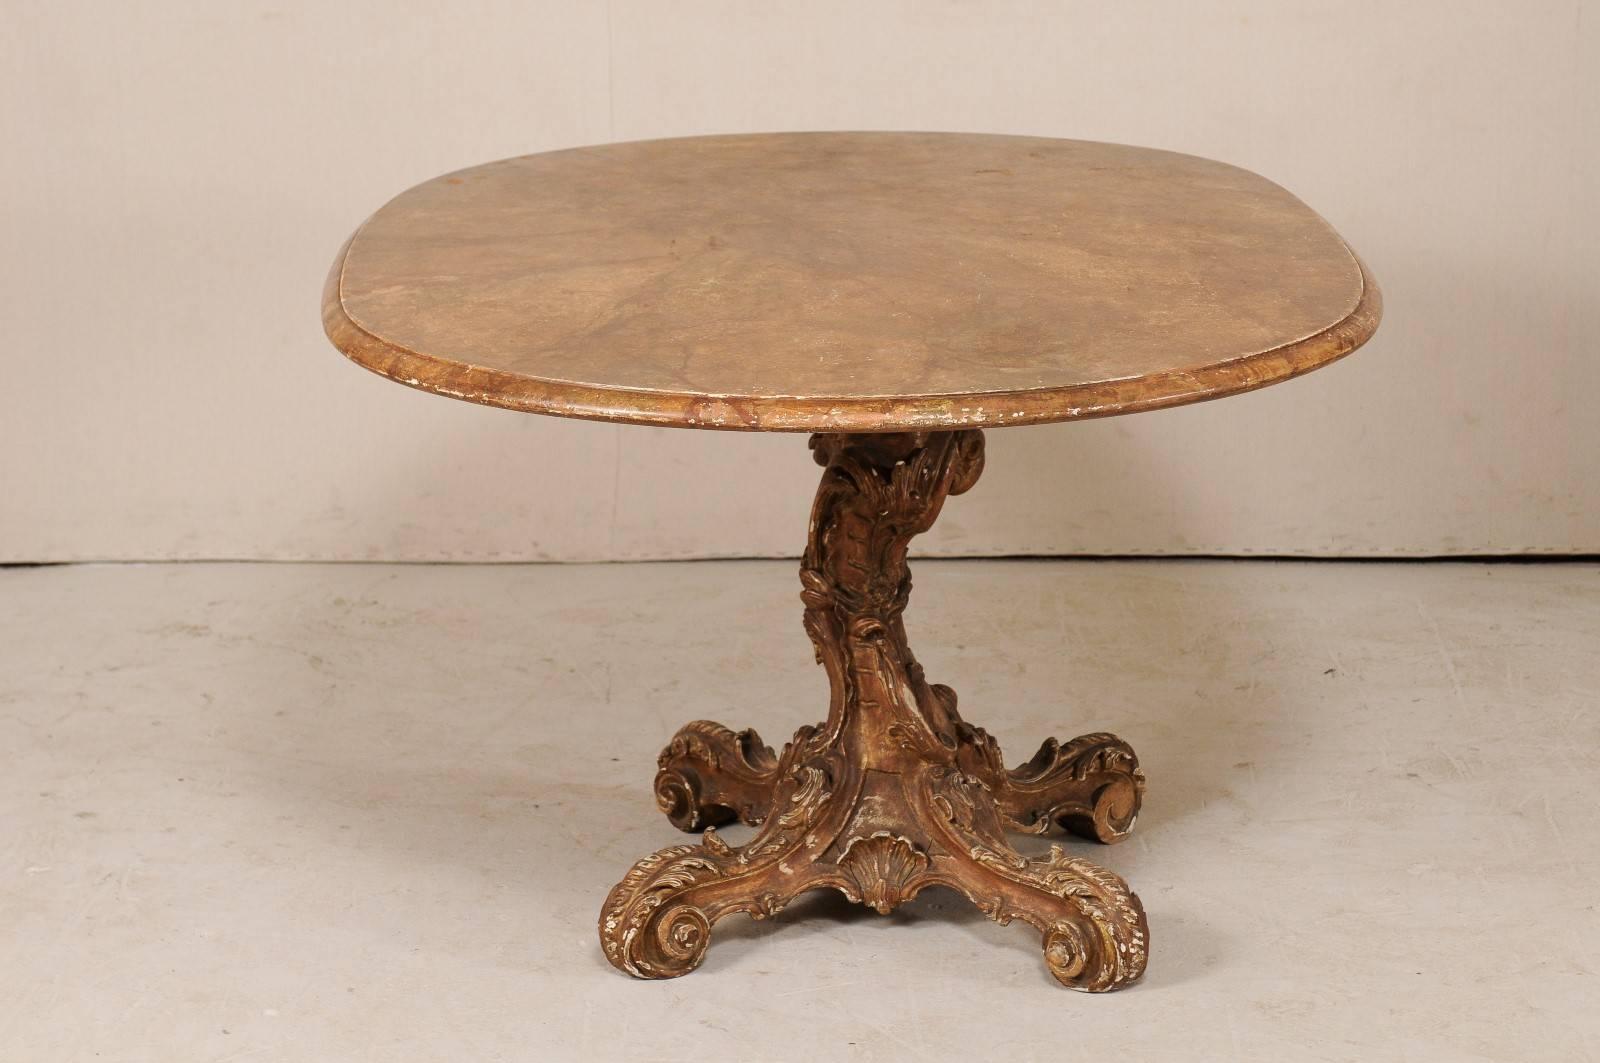 Italian 19th Century Oval Pedestal Table with Carved Wood Base in Warm Hues 7